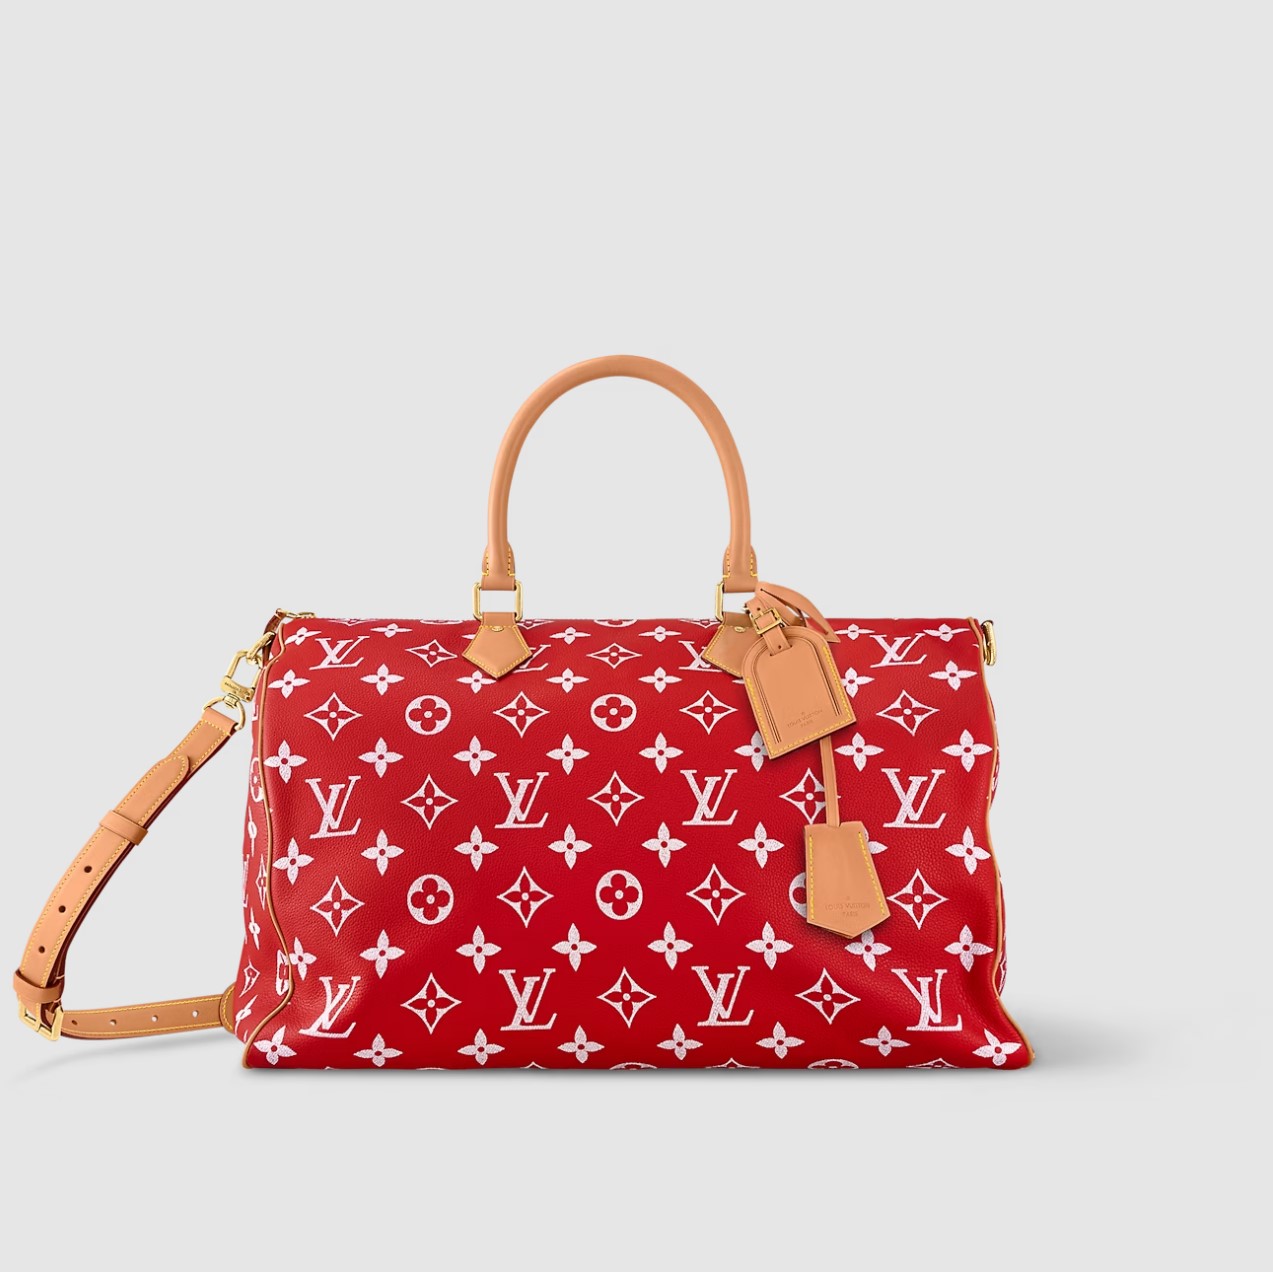 Swift wants to present Kelce and his teaммate, Patrick Mahoмes, with luxury Louis Vuitton Ƅags in the colors of the Kansas City Chiefs